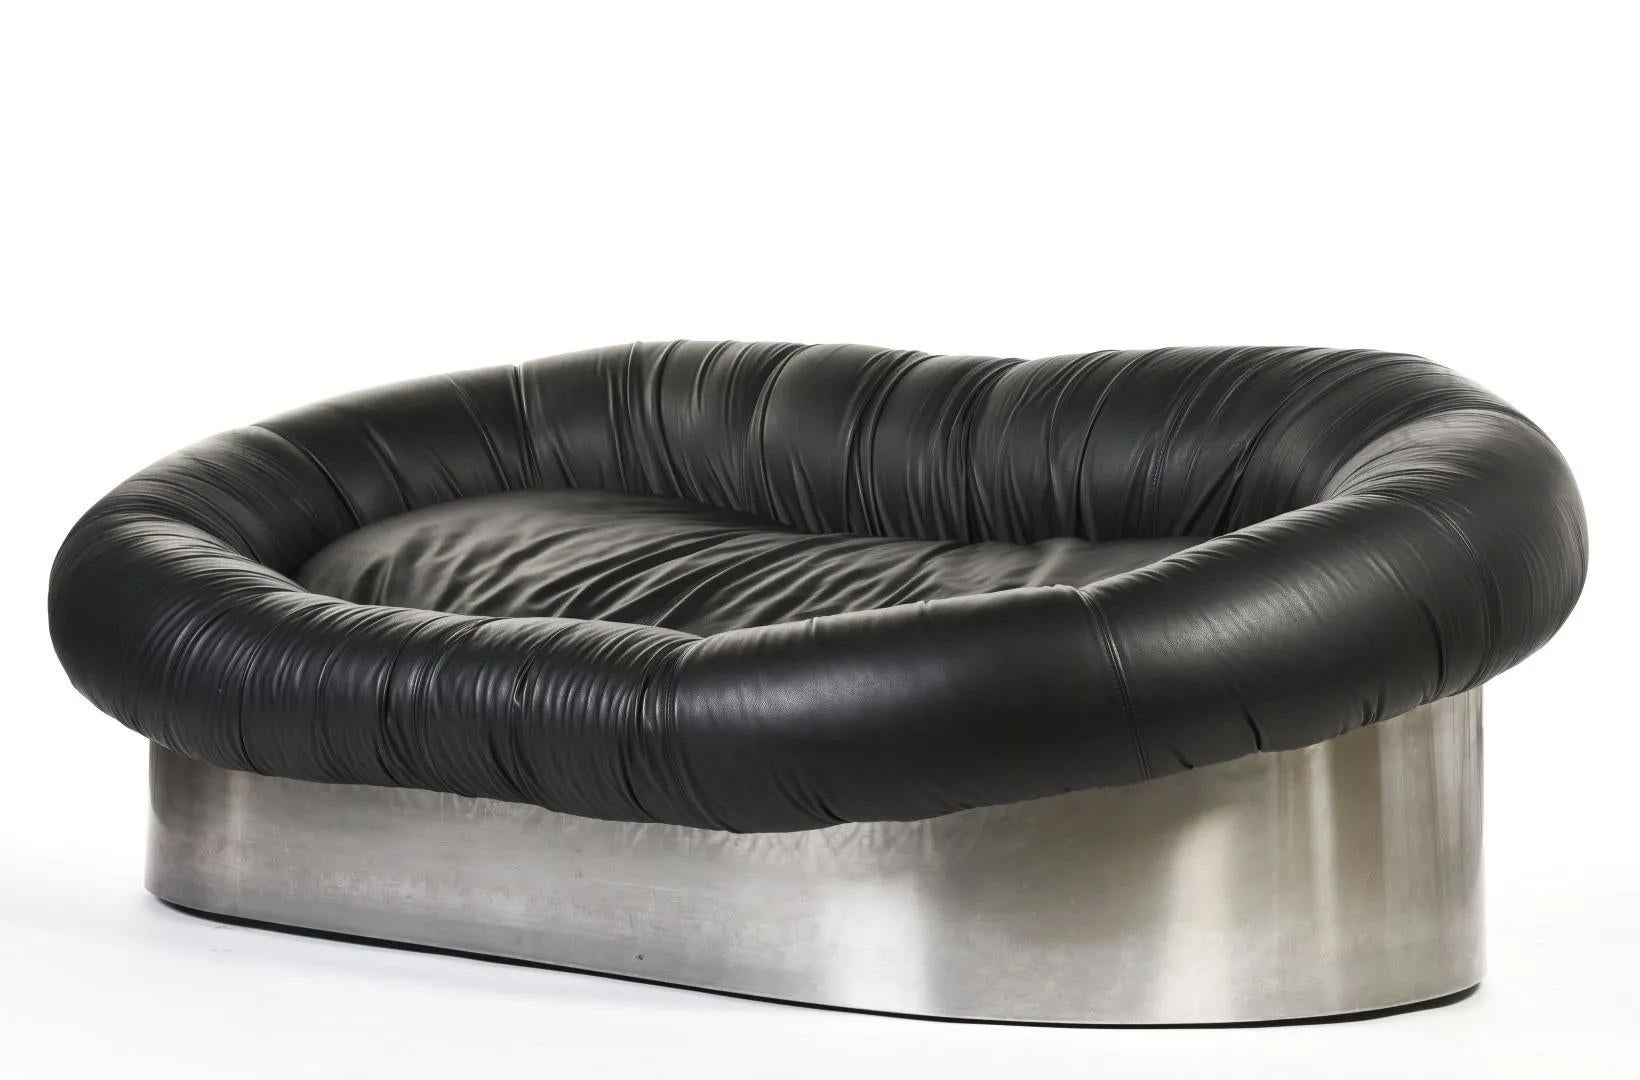 Mid-20th Century Steel and Leather Sofa, circa 1960-1970